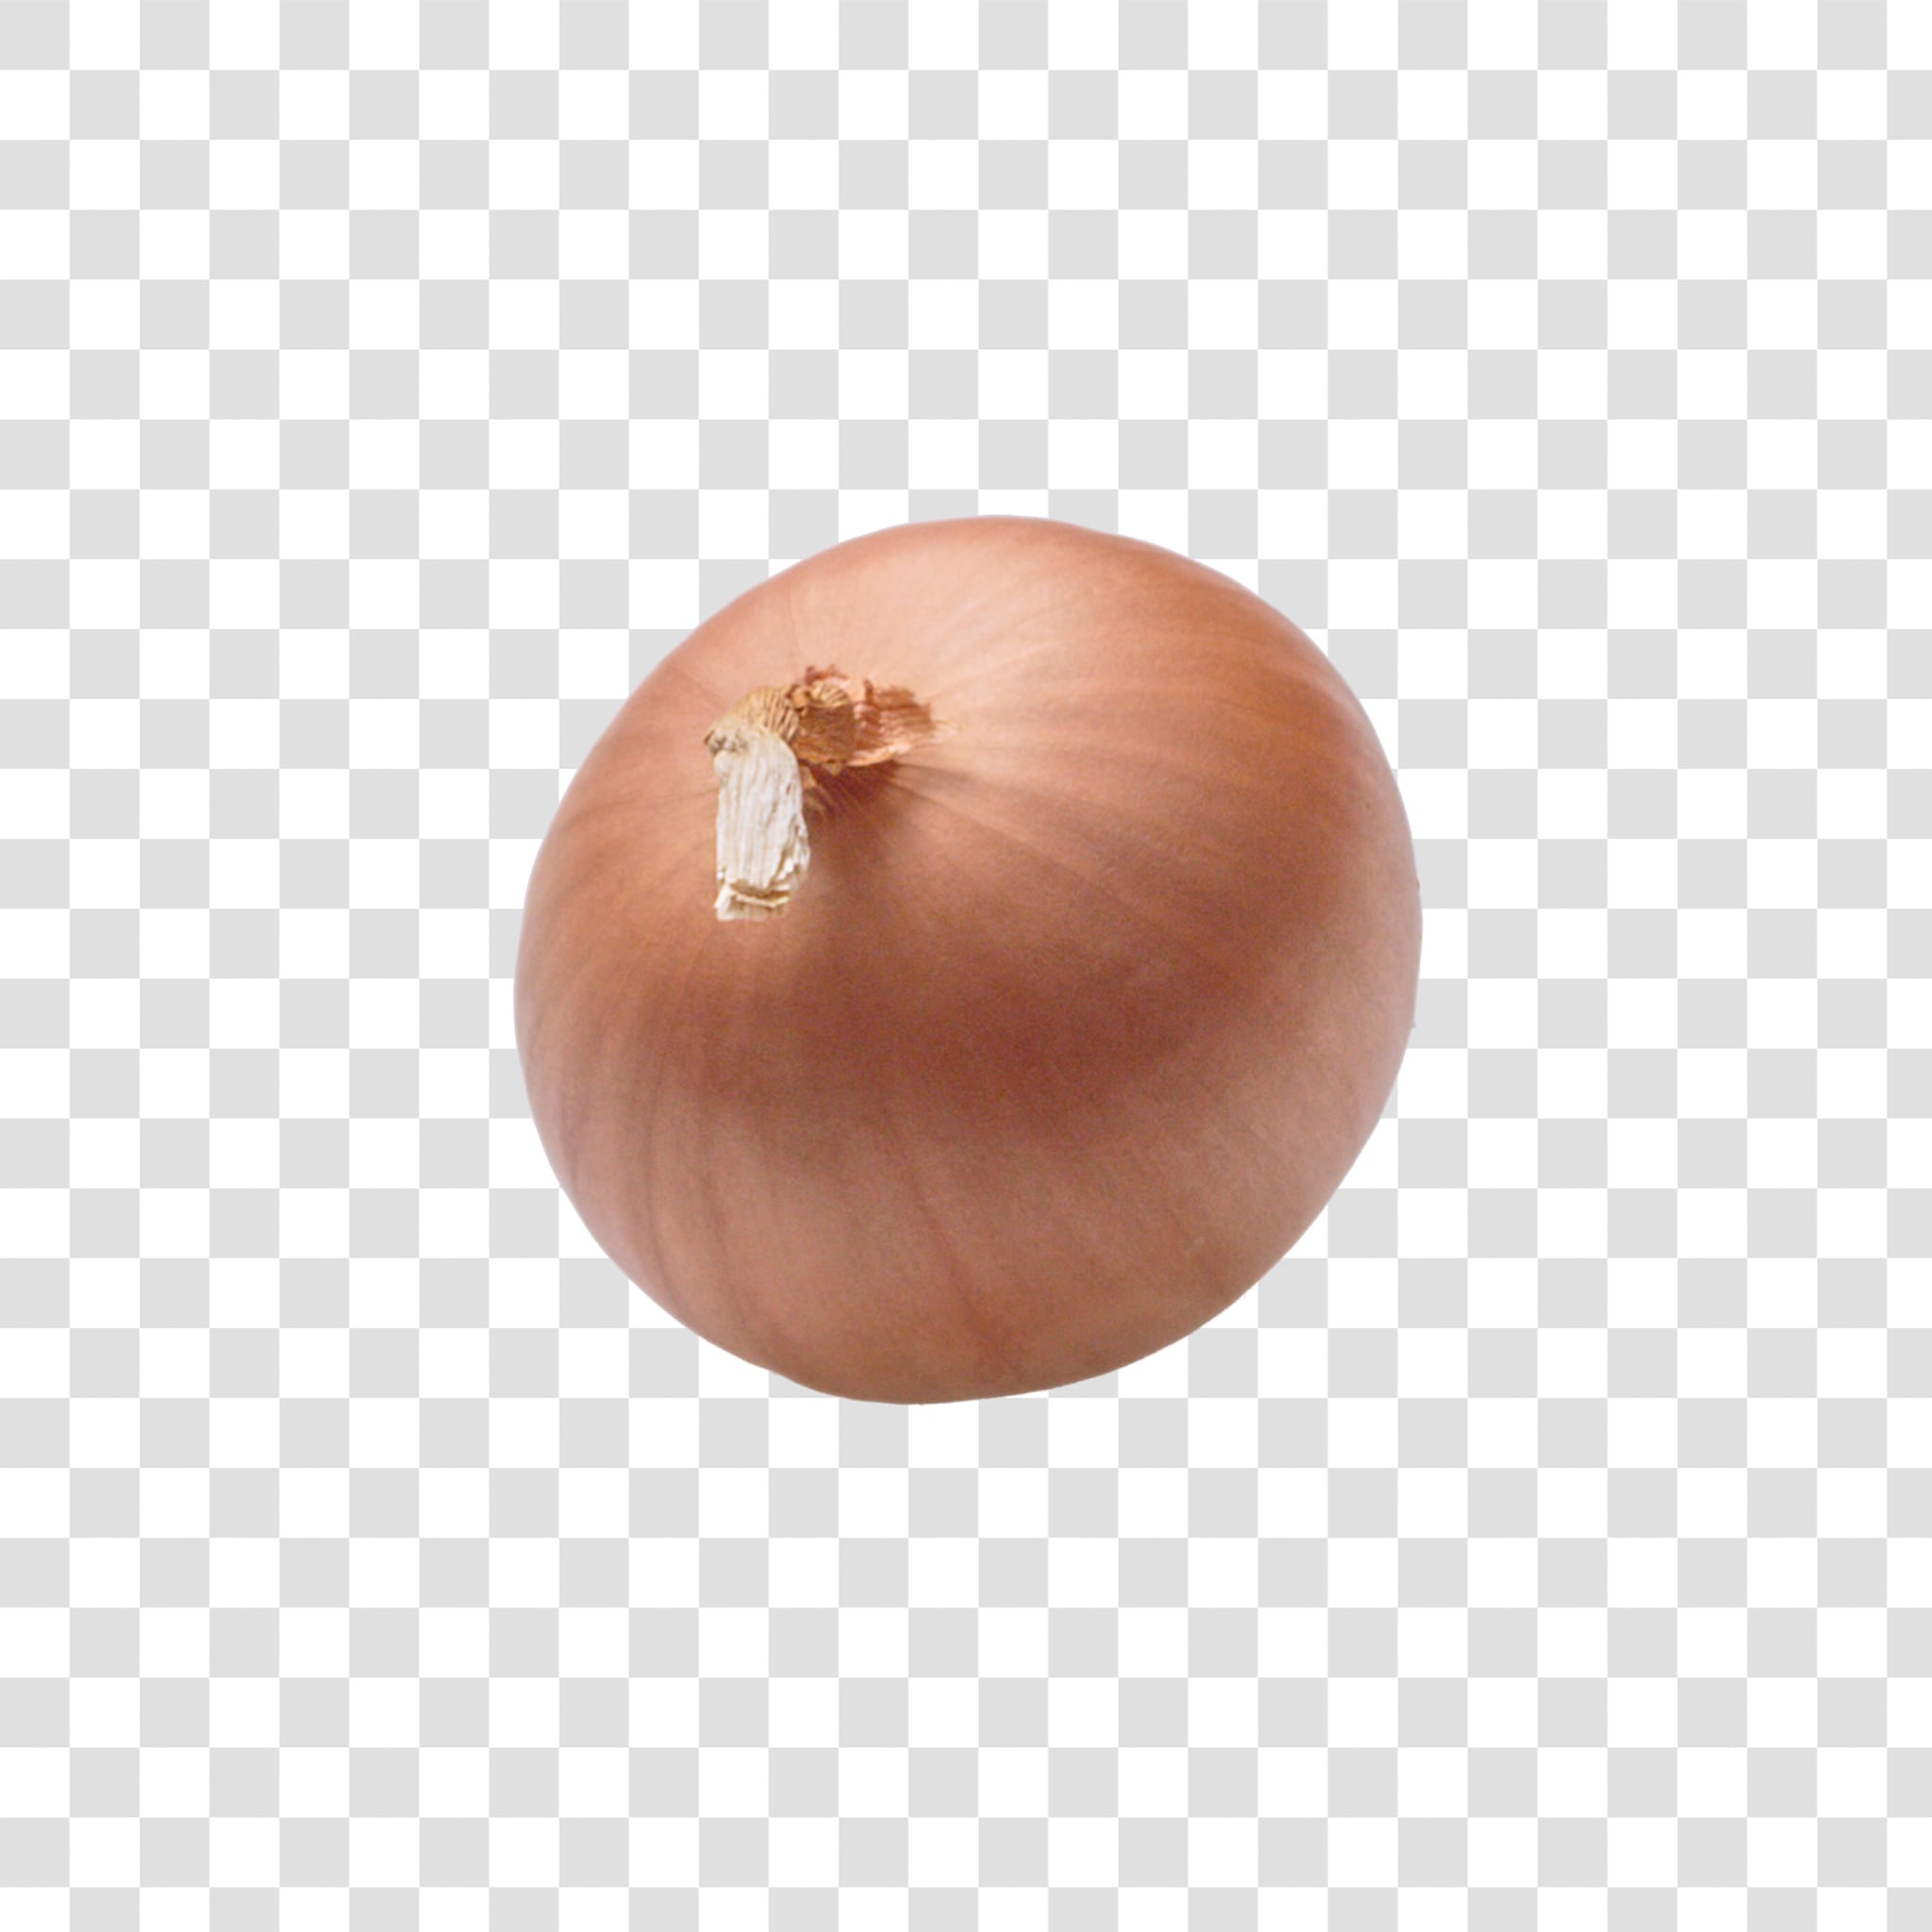 Onion image with transparent background